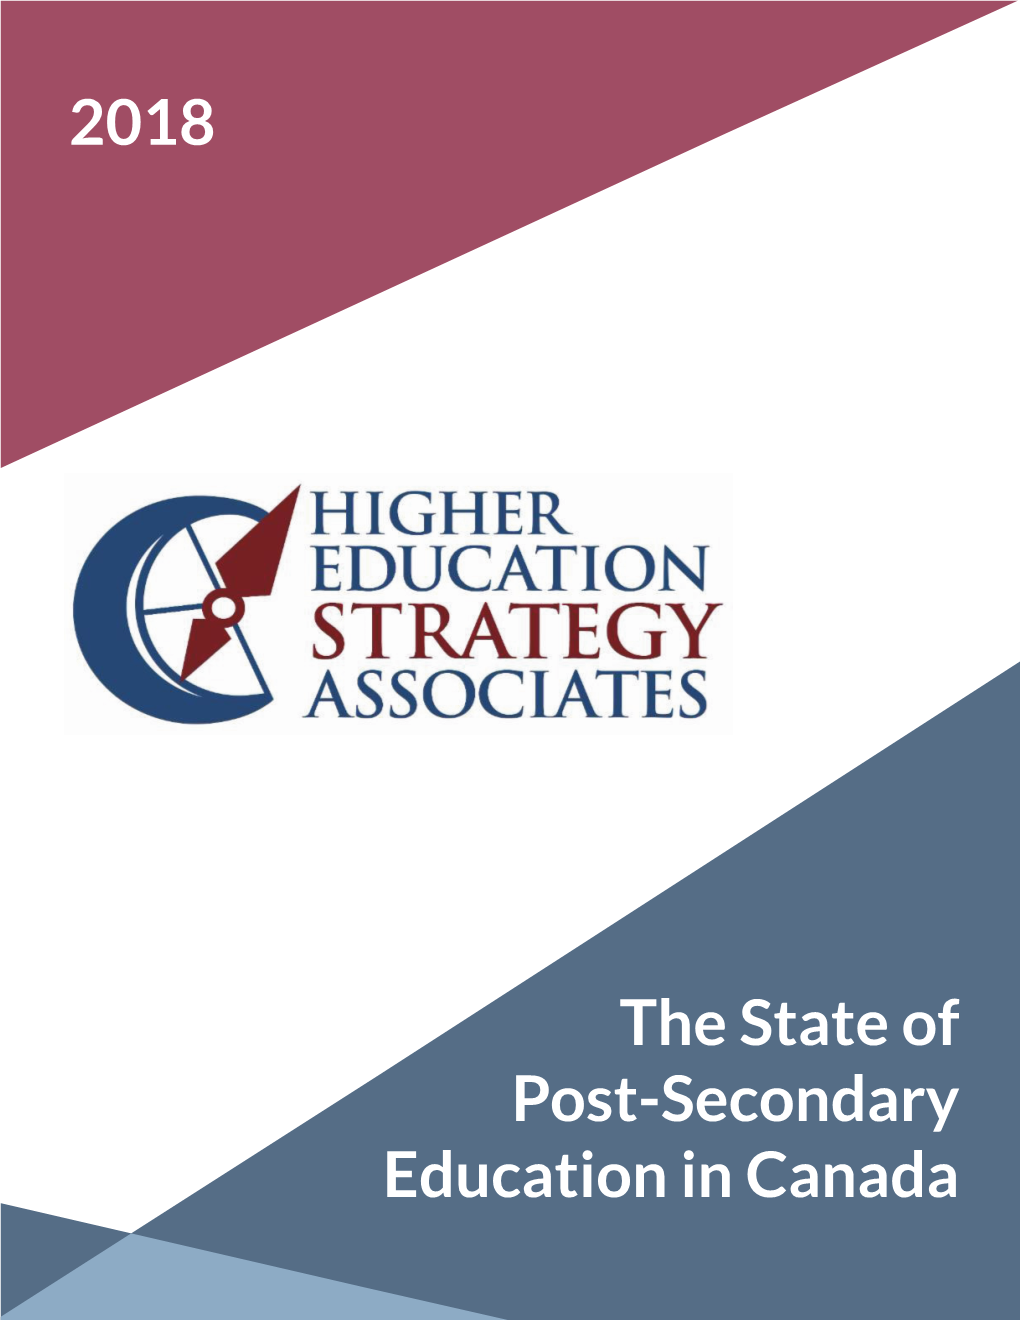 The State of Post-Secondary Education in Canada 2018